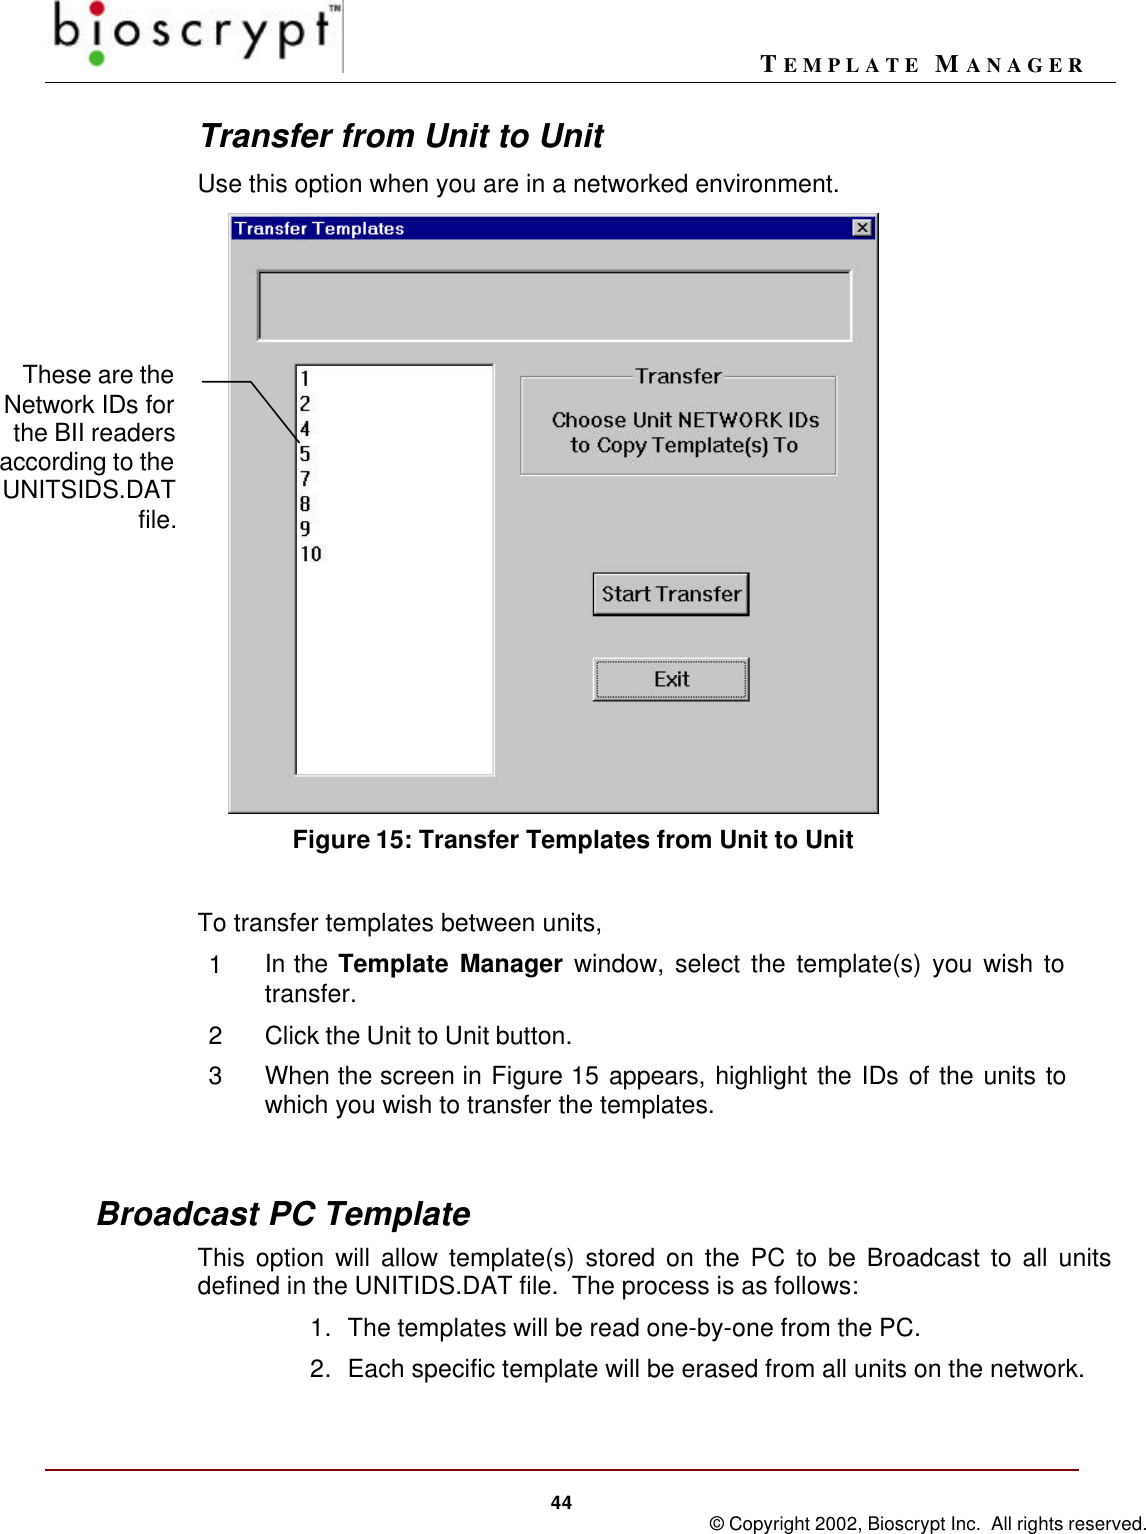 TEMPLATE MANAGER44 © Copyright 2002, Bioscrypt Inc.  All rights reserved.Transfer from Unit to UnitUse this option when you are in a networked environment.   Figure 15: Transfer Templates from Unit to UnitTo transfer templates between units,1In the Template Manager window, select the template(s) you wish totransfer.2Click the Unit to Unit button.3When the screen in Figure 15 appears, highlight the IDs of the units towhich you wish to transfer the templates.Broadcast PC TemplateThis option will allow template(s) stored on the PC to be Broadcast to all unitsdefined in the UNITIDS.DAT file.  The process is as follows:1. The templates will be read one-by-one from the PC.2. Each specific template will be erased from all units on the network.These are theNetwork IDs forthe BII readersaccording to theUNITSIDS.DATfile.